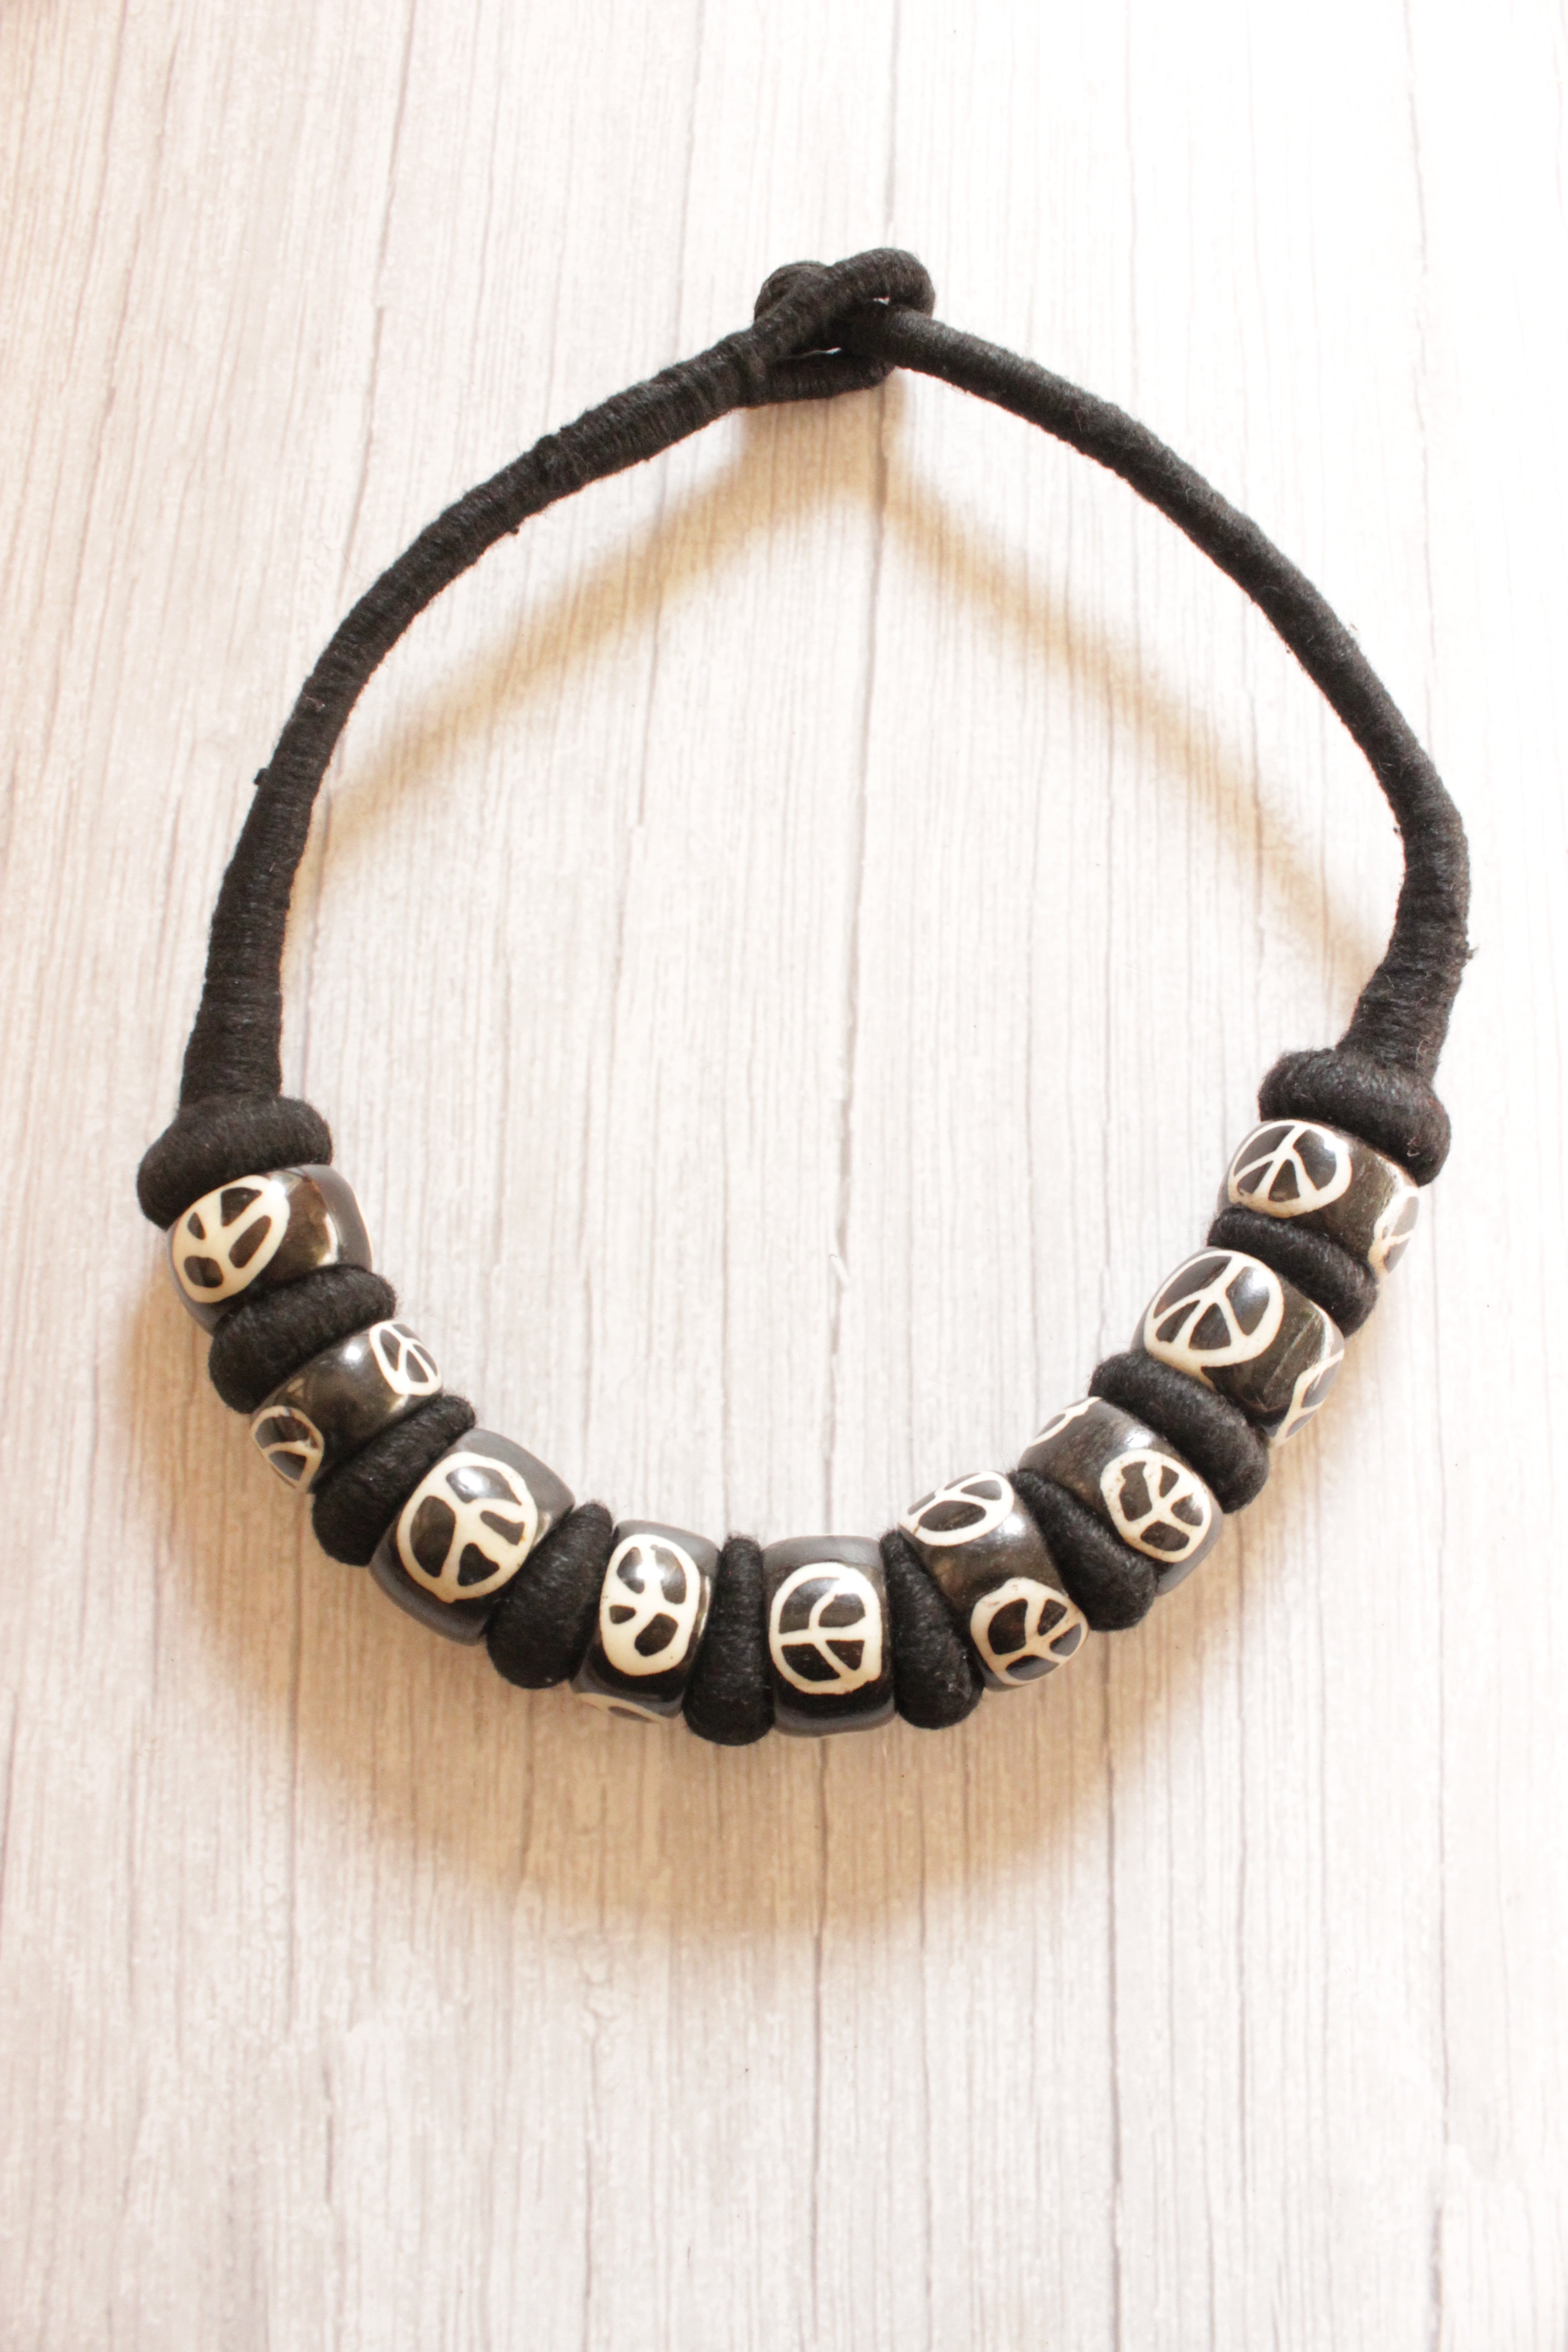 Engraved Wooden Beads Woven in a Rope Choker Necklace